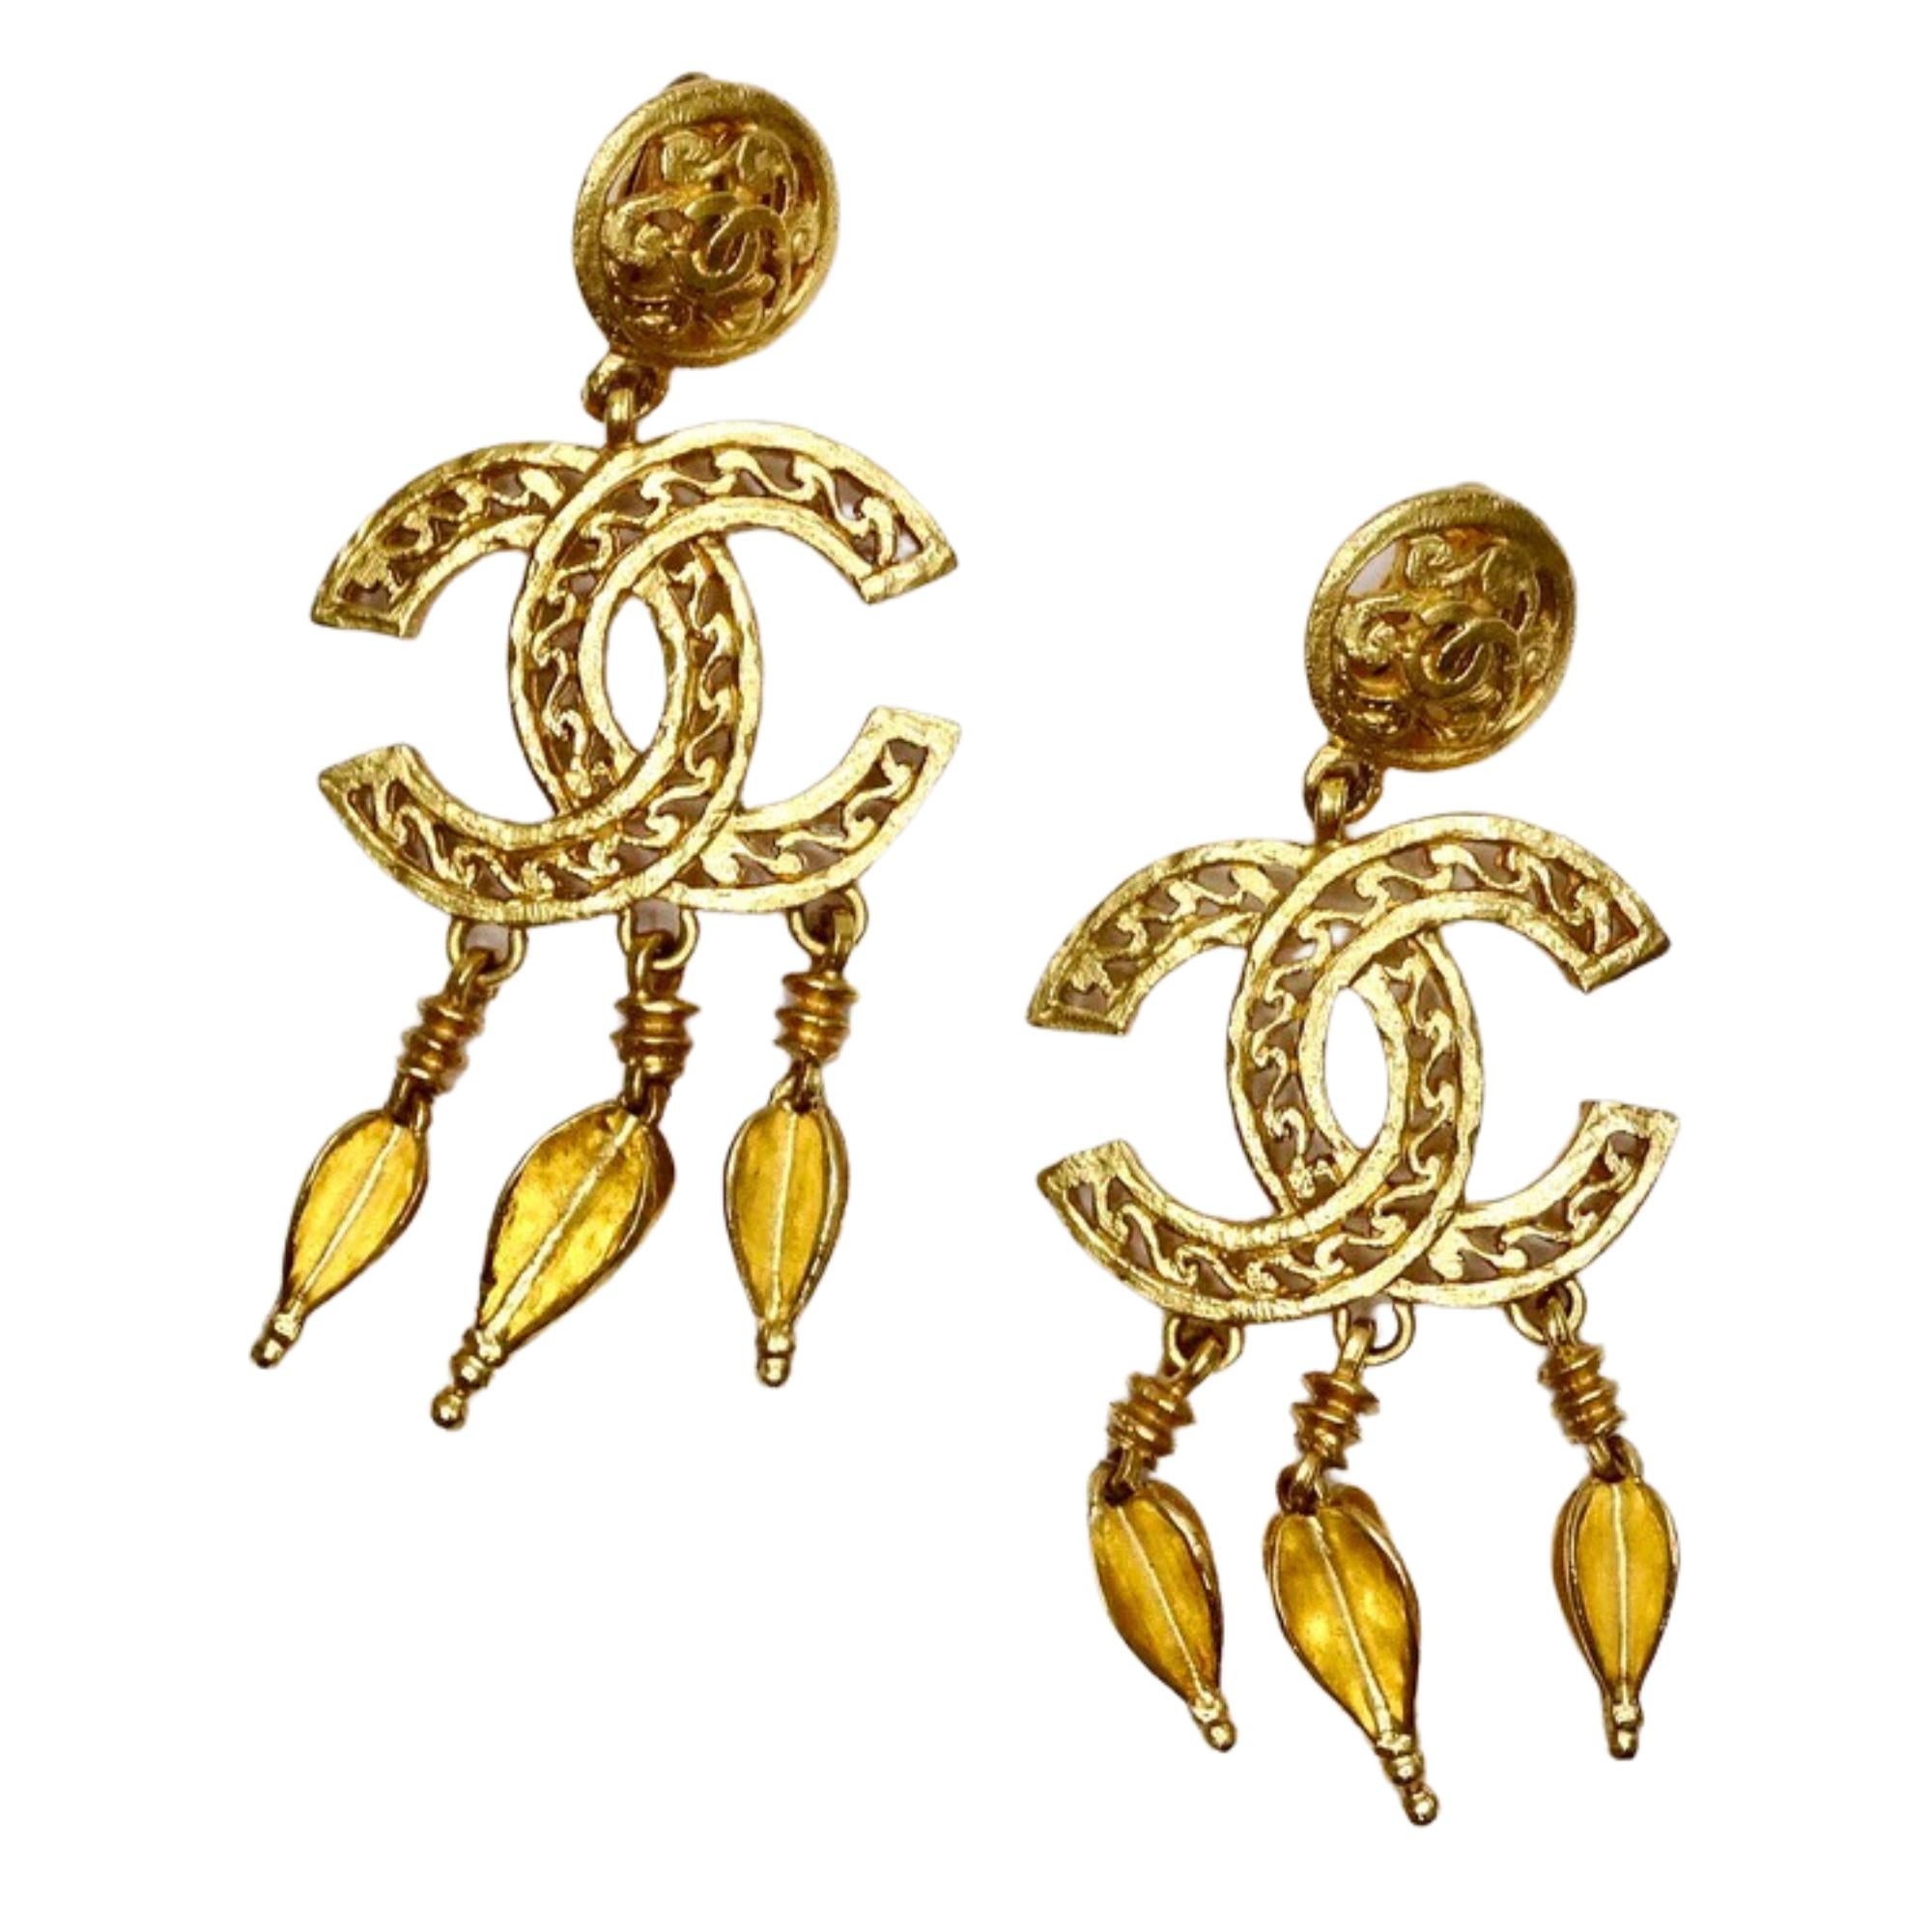 These 1990s vintage Chanel earrings are made of textured metal with an antiqued gold tone color. The earrings feature ornate cut out details, large textured CC pendants, three hanging charms, and a clip on backing. These earrings will create a lot